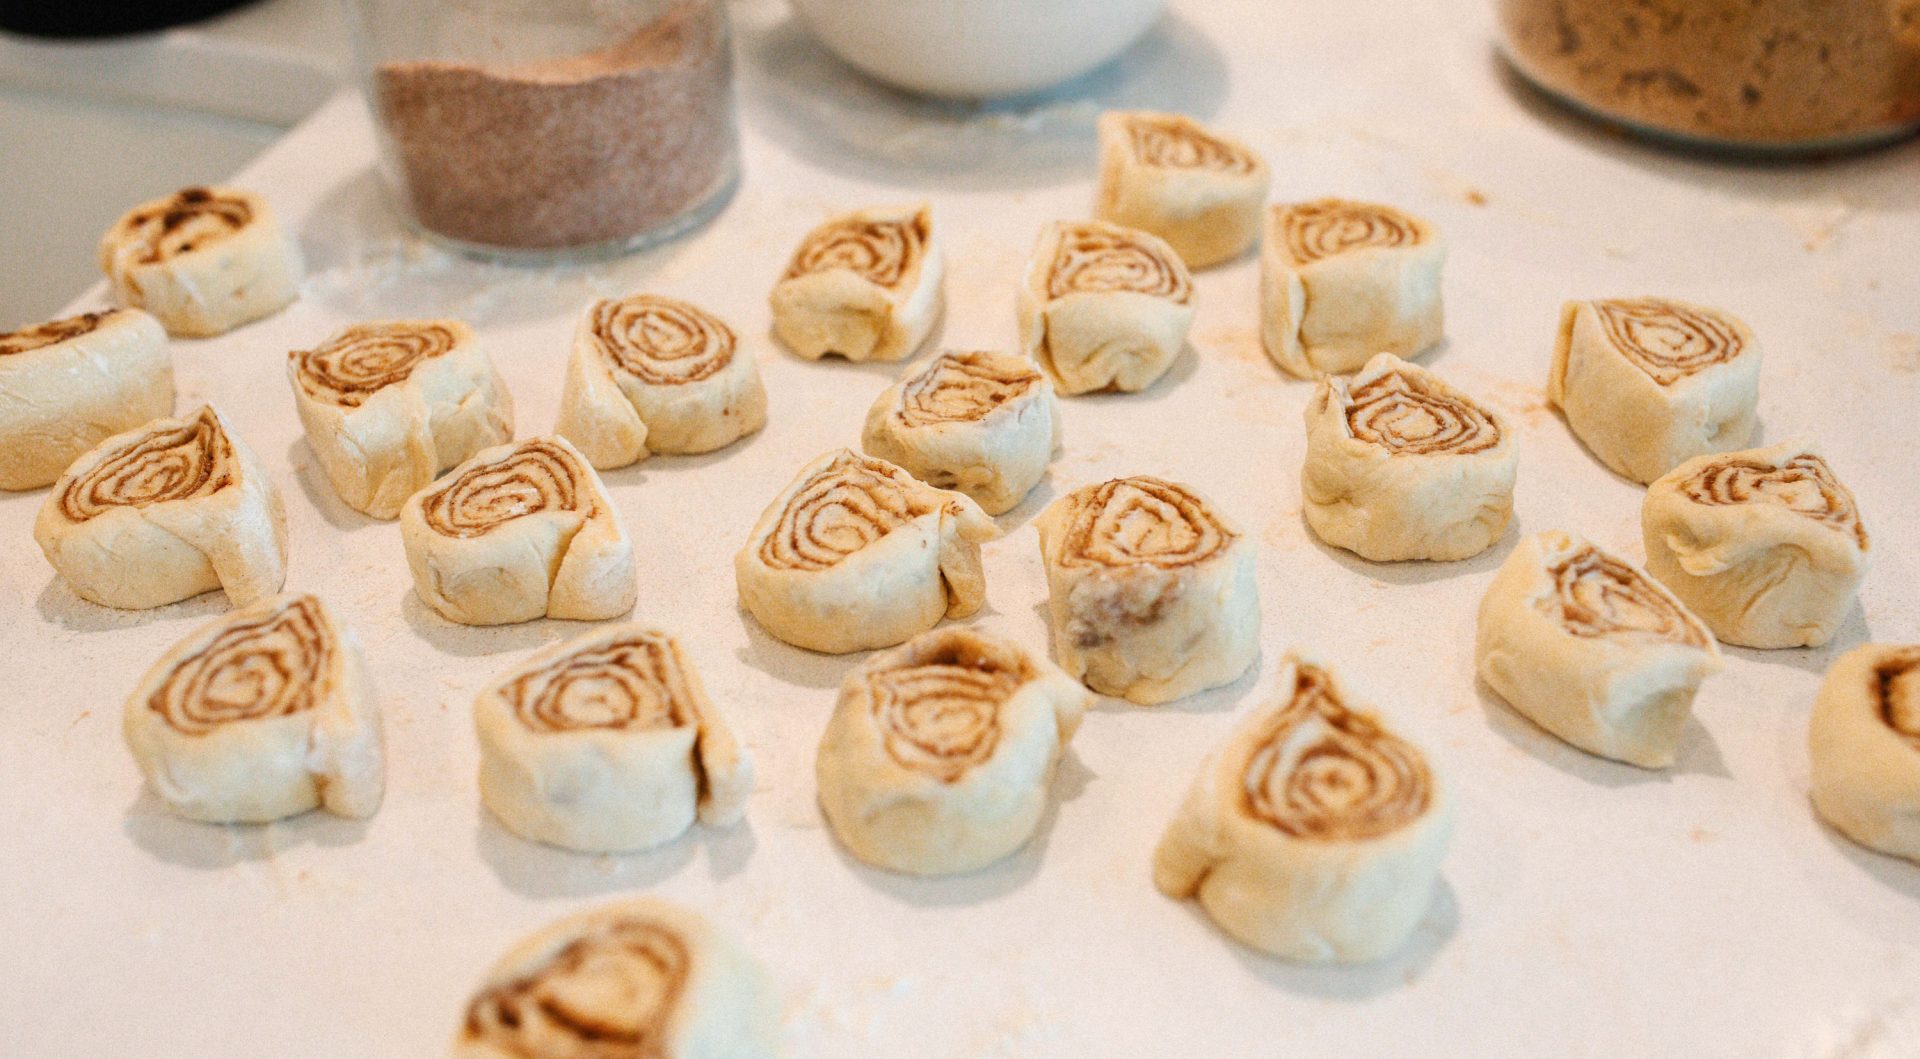 the best cinnamon rolls you'll ever eat, easy to make cinnamon rolls, cinnamon rolls, baking, baked cinnamon rolls, cinnamon rolls from scratch, homemade cinnamon buns, frosting, vanilla frosting, cinnamon rolls, frosted cinnamon rolls,